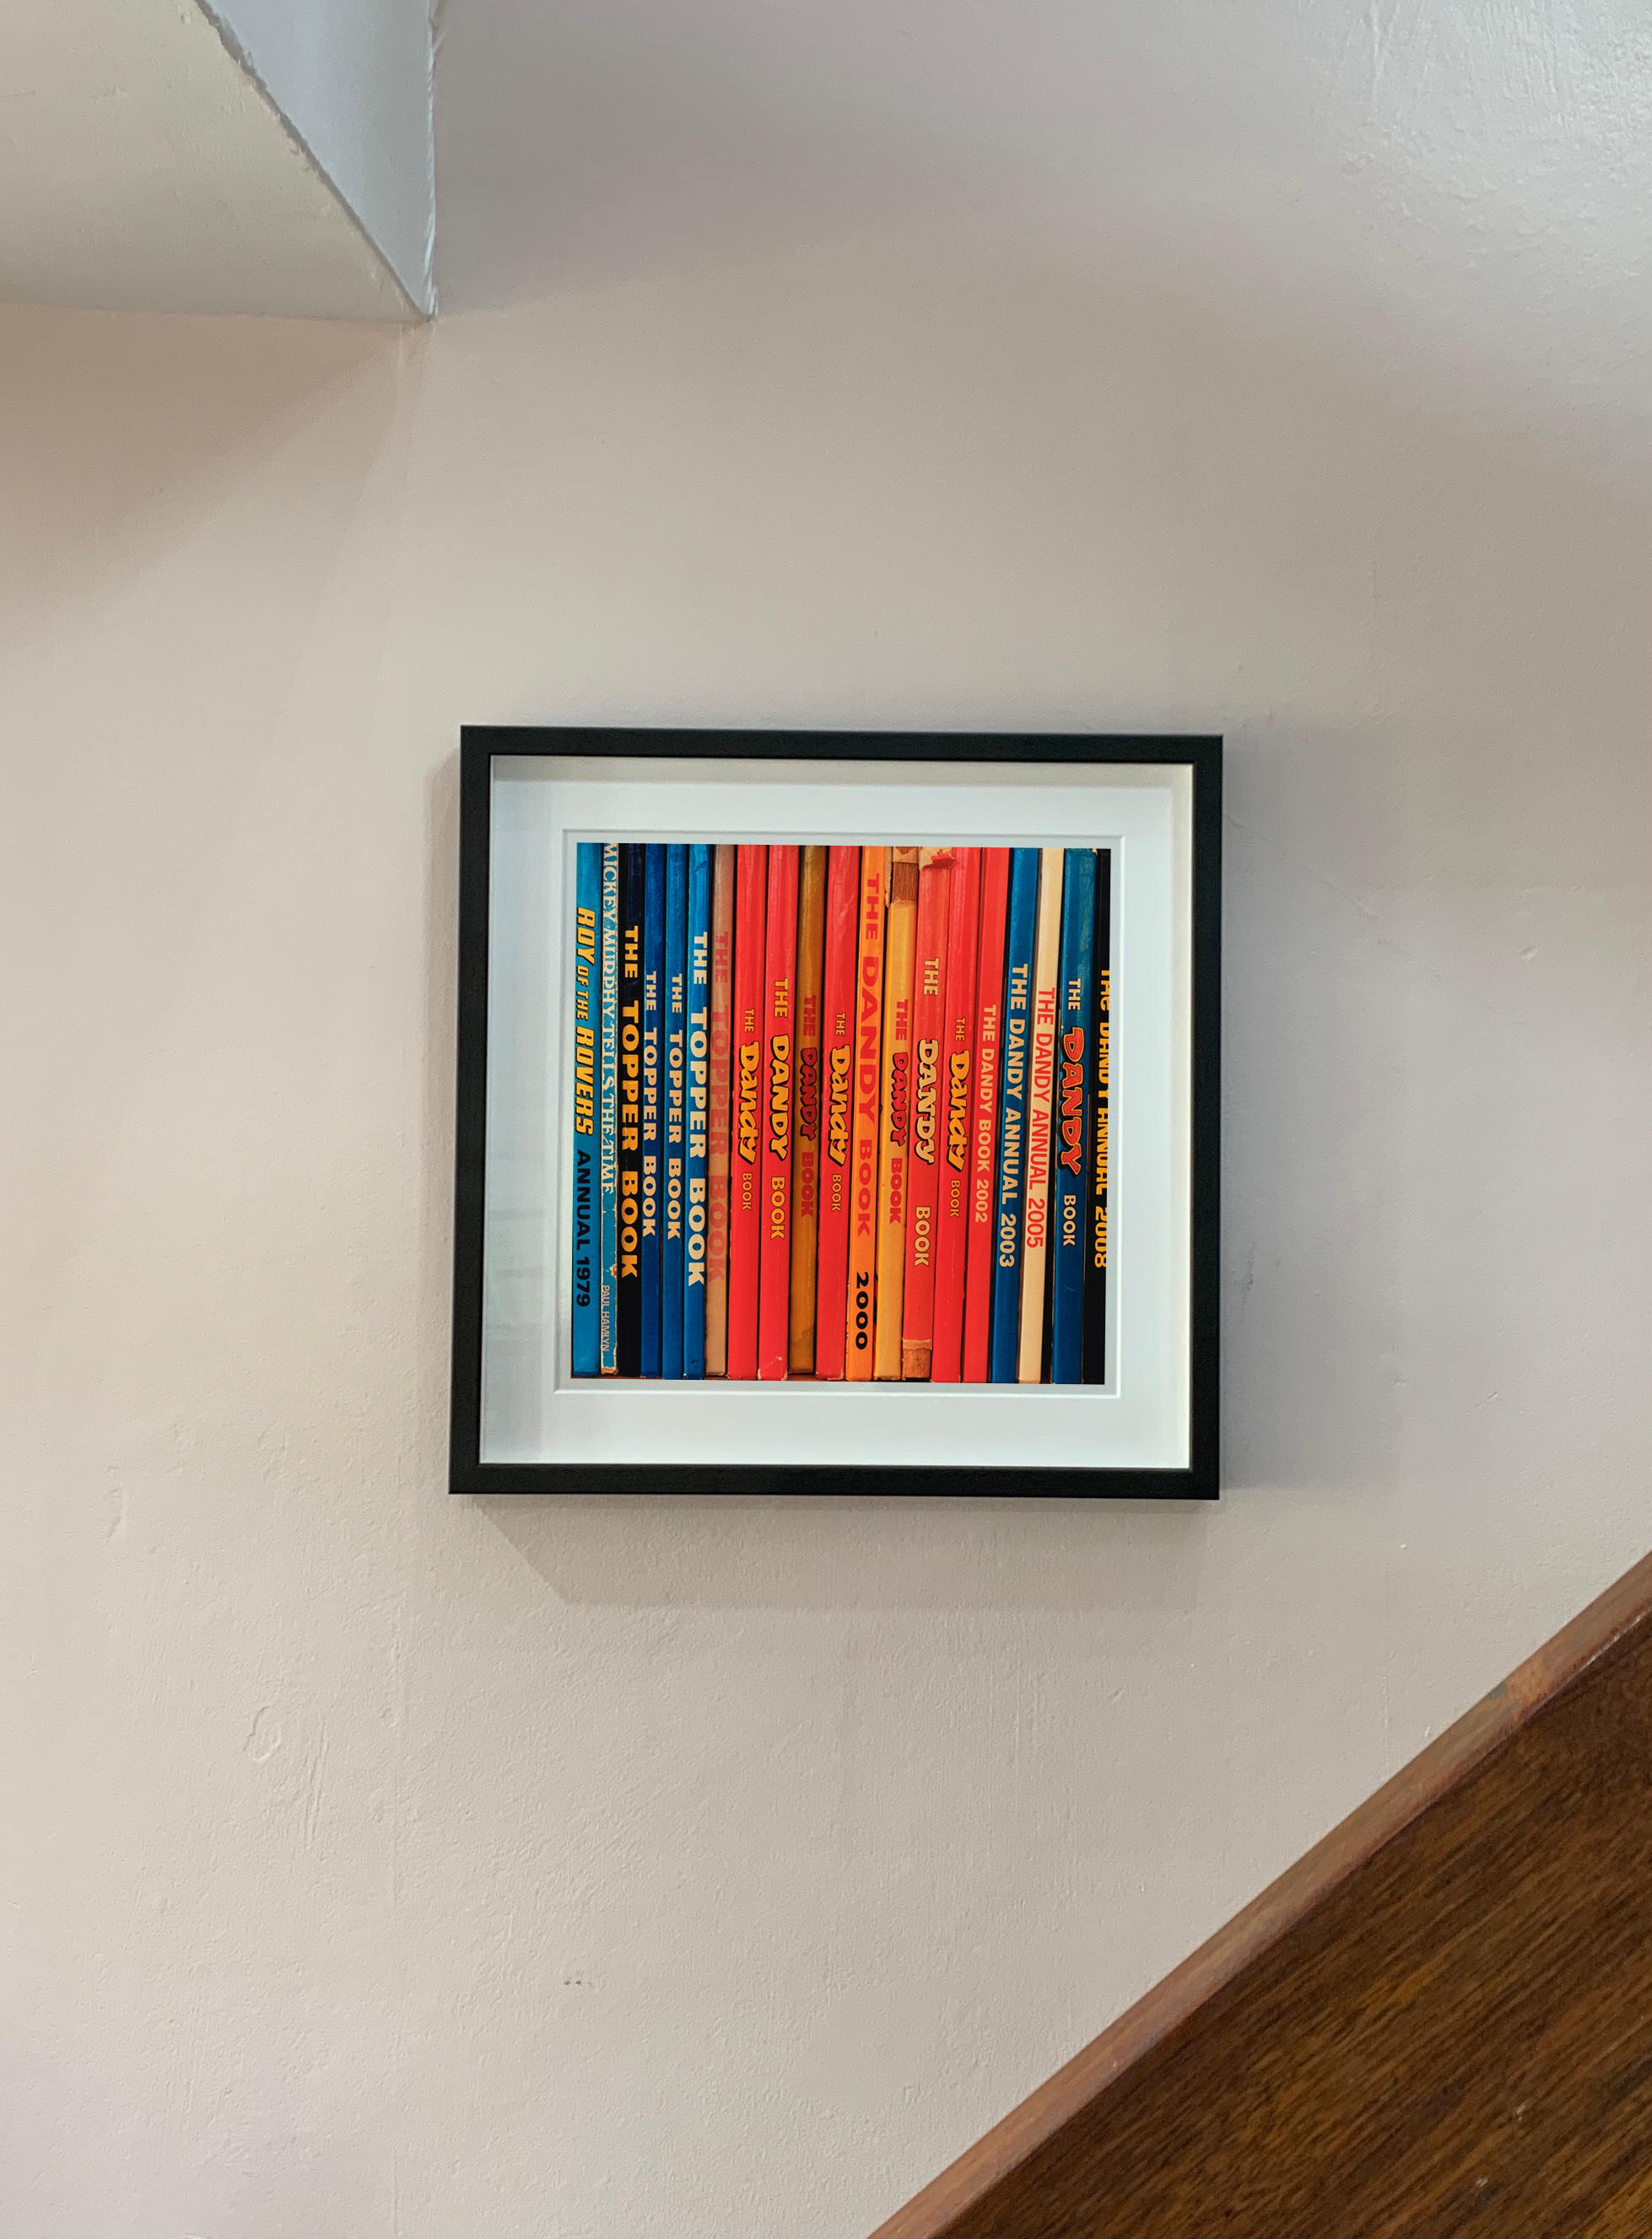 The Rovers, Burnham Market, Norfolk - Vintage book spines multicolor photograph - Red Color Photograph by Richard Heeps